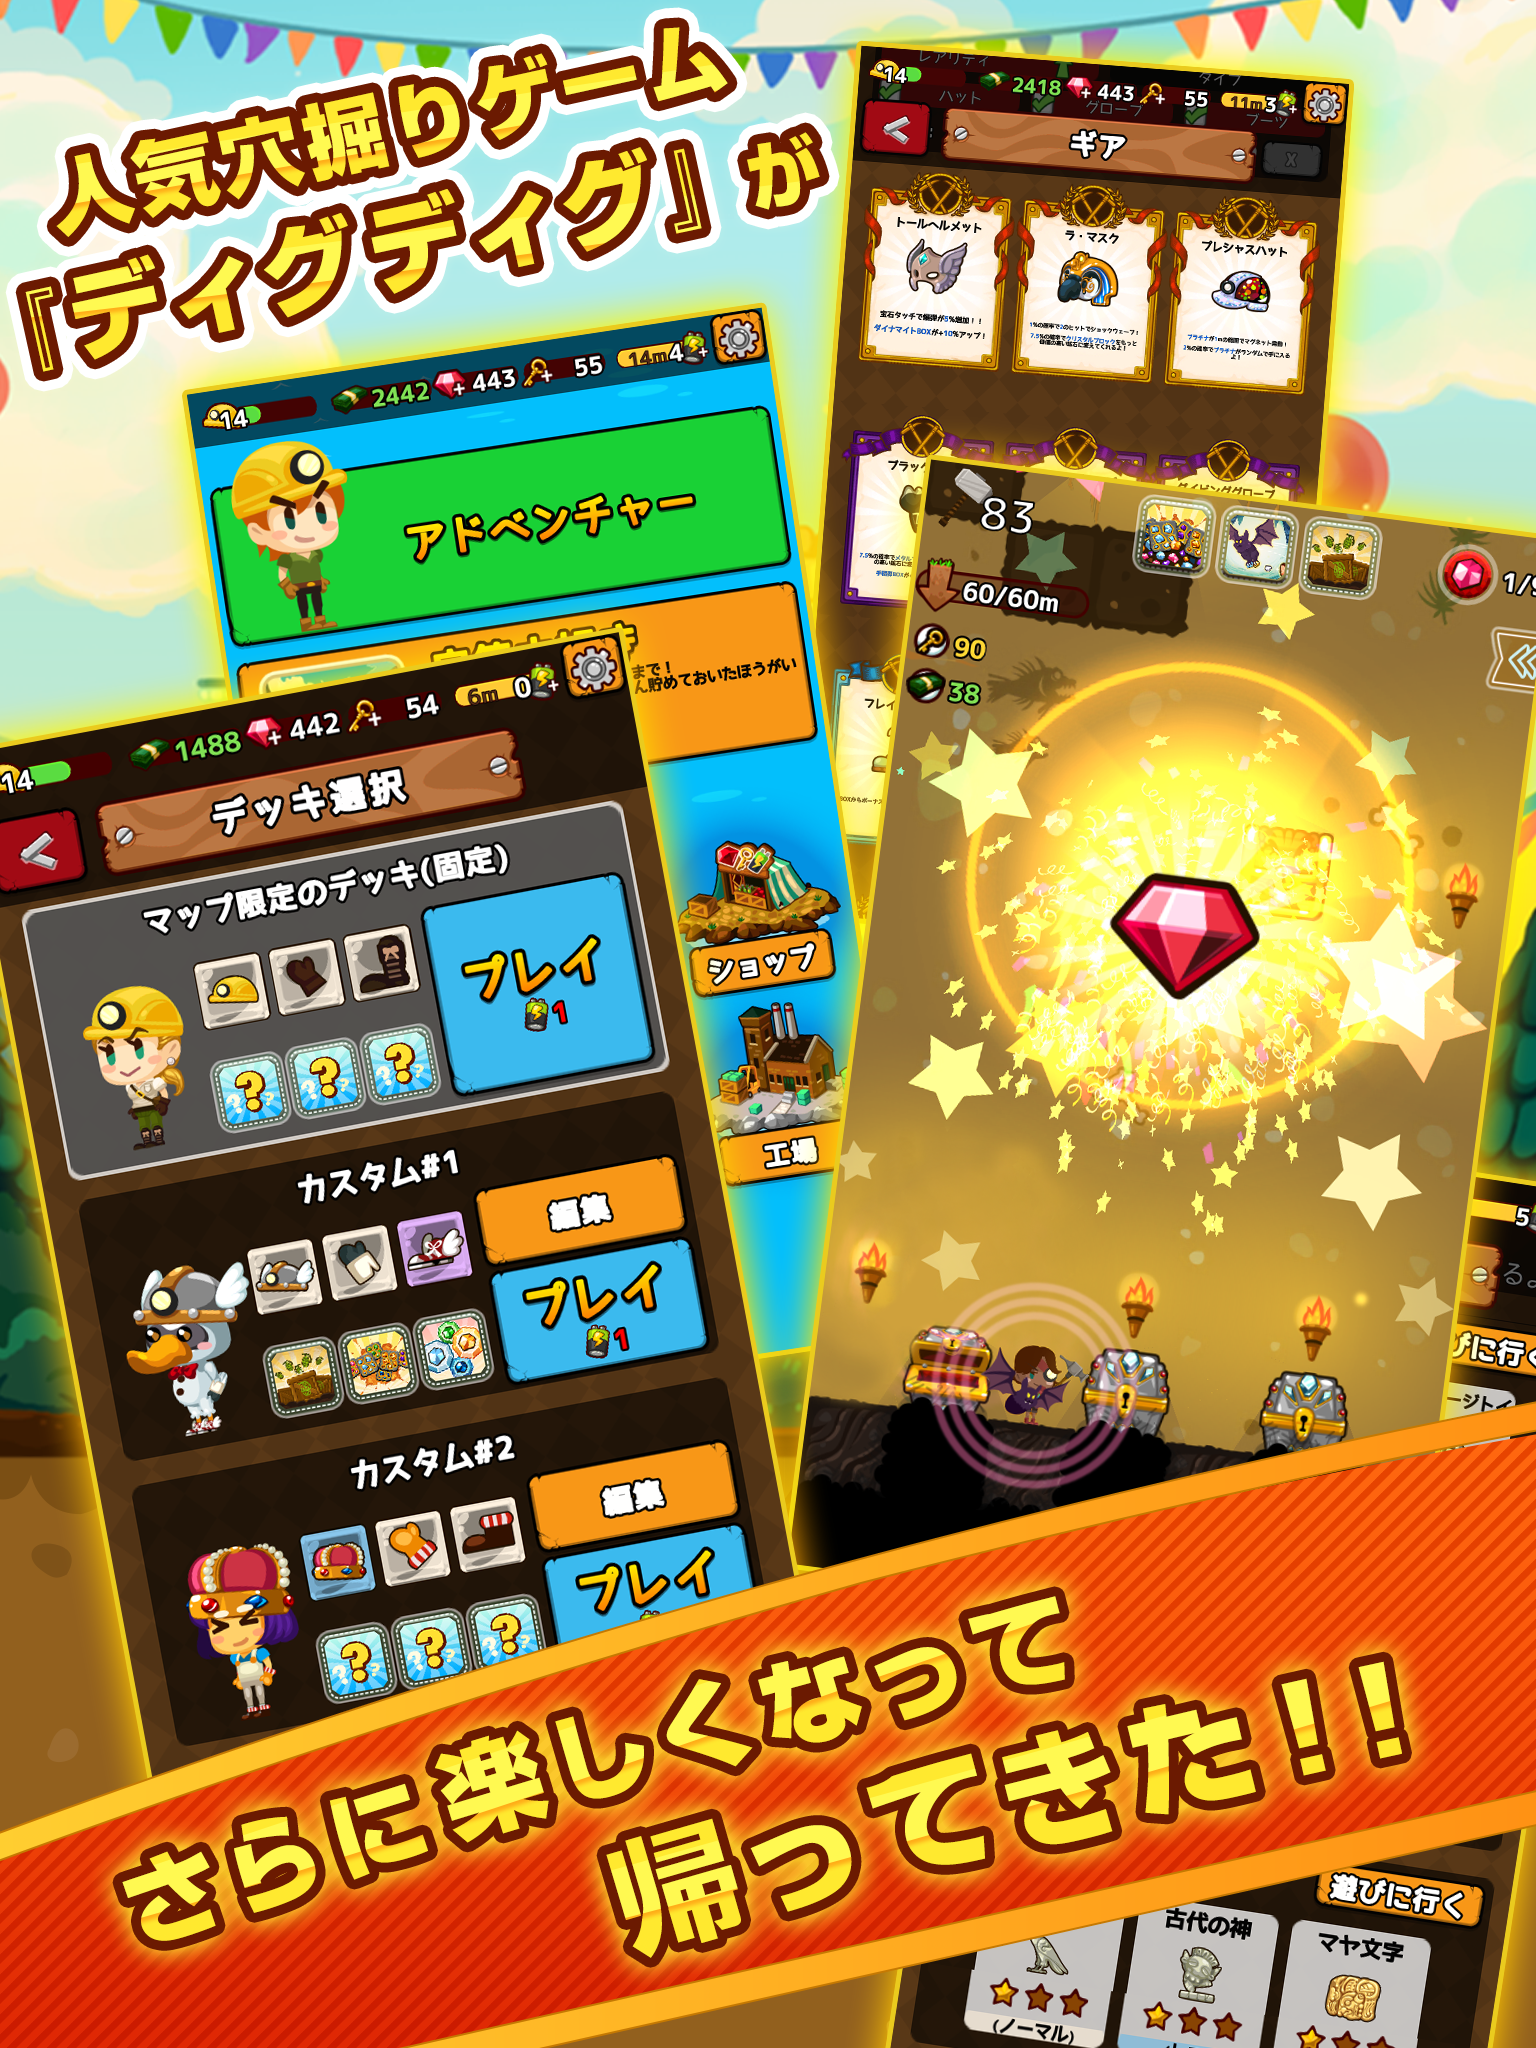 Screenshot 1 of Dig Dig DX (Deluxe) ~ Einfaches beliebtes One-Tap-Spiel ~ 2.1.3